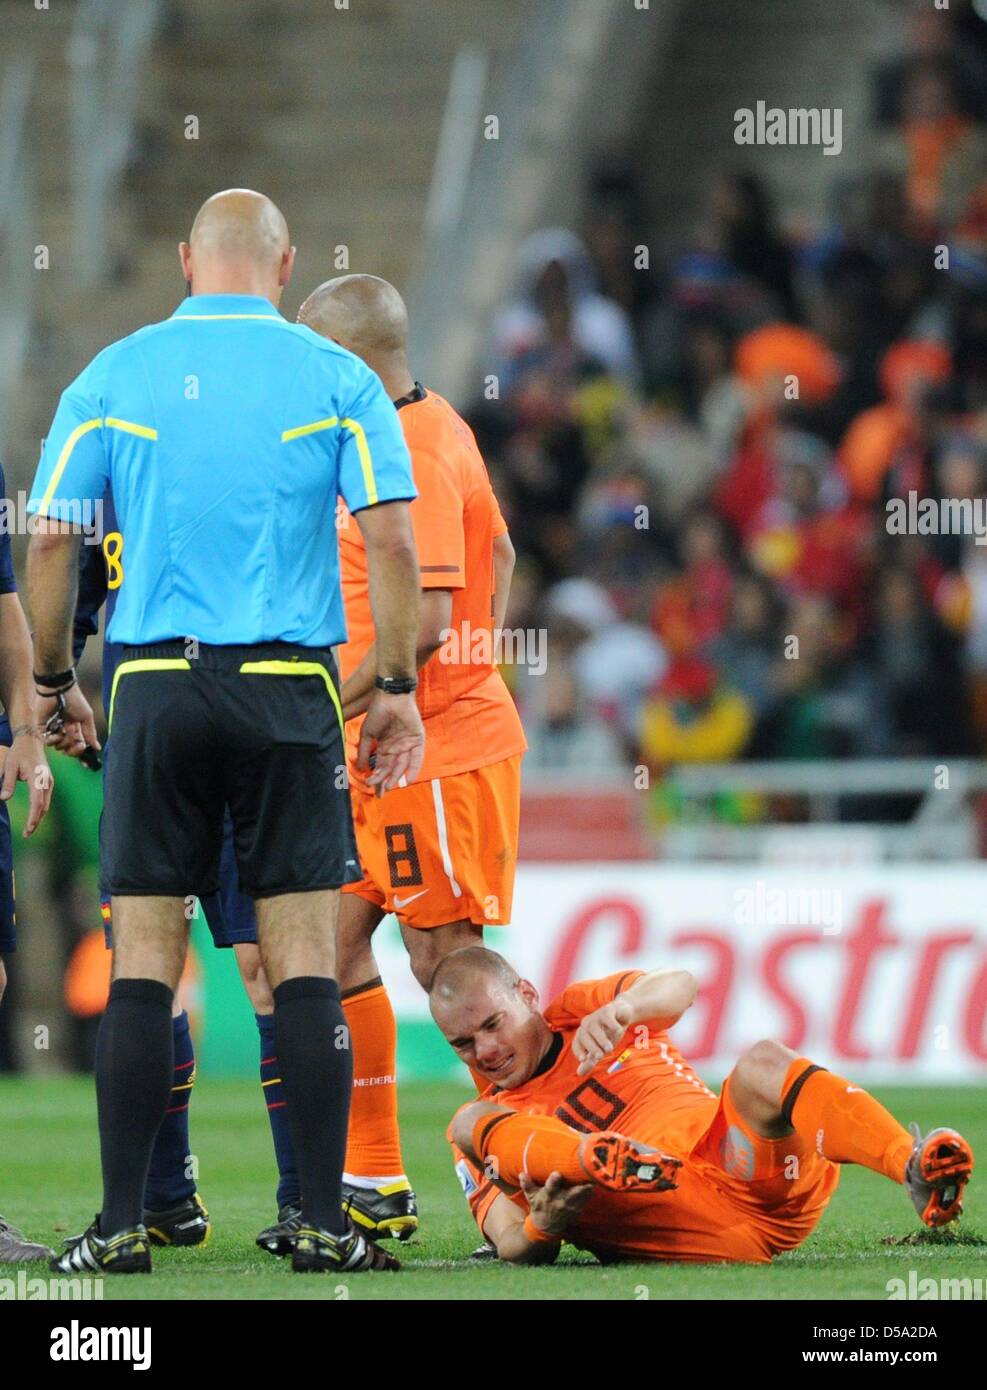 Dutch Wesley Sneijder (R) on the ground watched by English referee Howard Webb during the 2010 FIFA World Cup final match between the Netherlands and Spain at Soccer City Stadium in Johannesburg, South Africa 11 July 2010. Photo: Marcus Brandt dpa - Please refer to http://dpaq.de/FIFA-WM2010-TC  +++(c) dpa - Bildfunk+++ Stock Photo